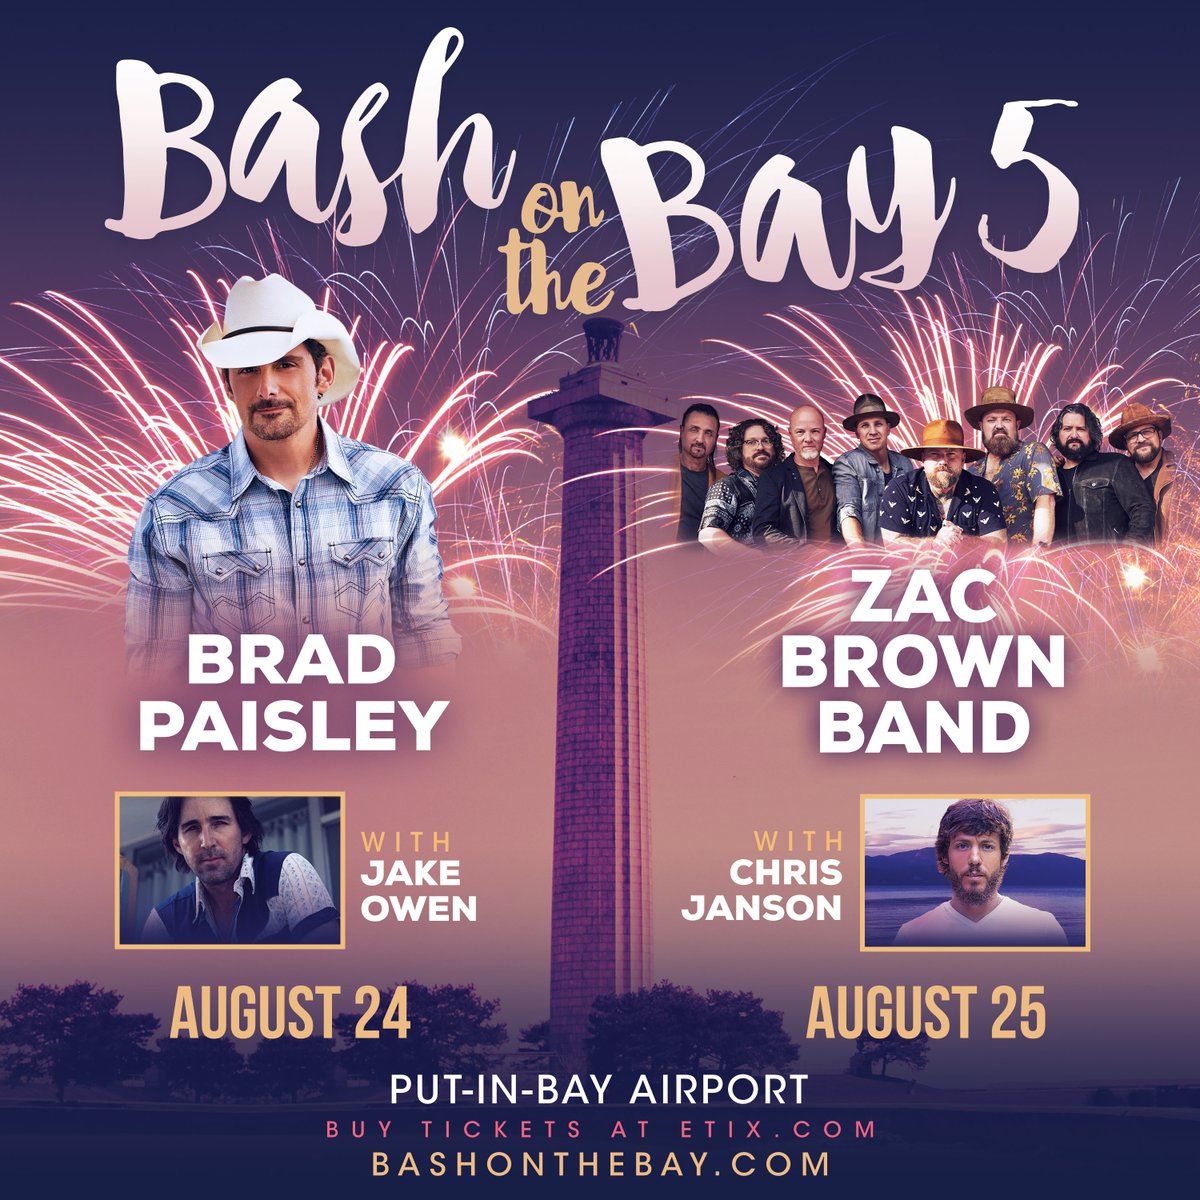 See Brad Paisley, Jake Owen, and Blanco Brown on Wed August 24! 

Click here---> https://t.co/iisHckselt https://t.co/4JduASeLiE